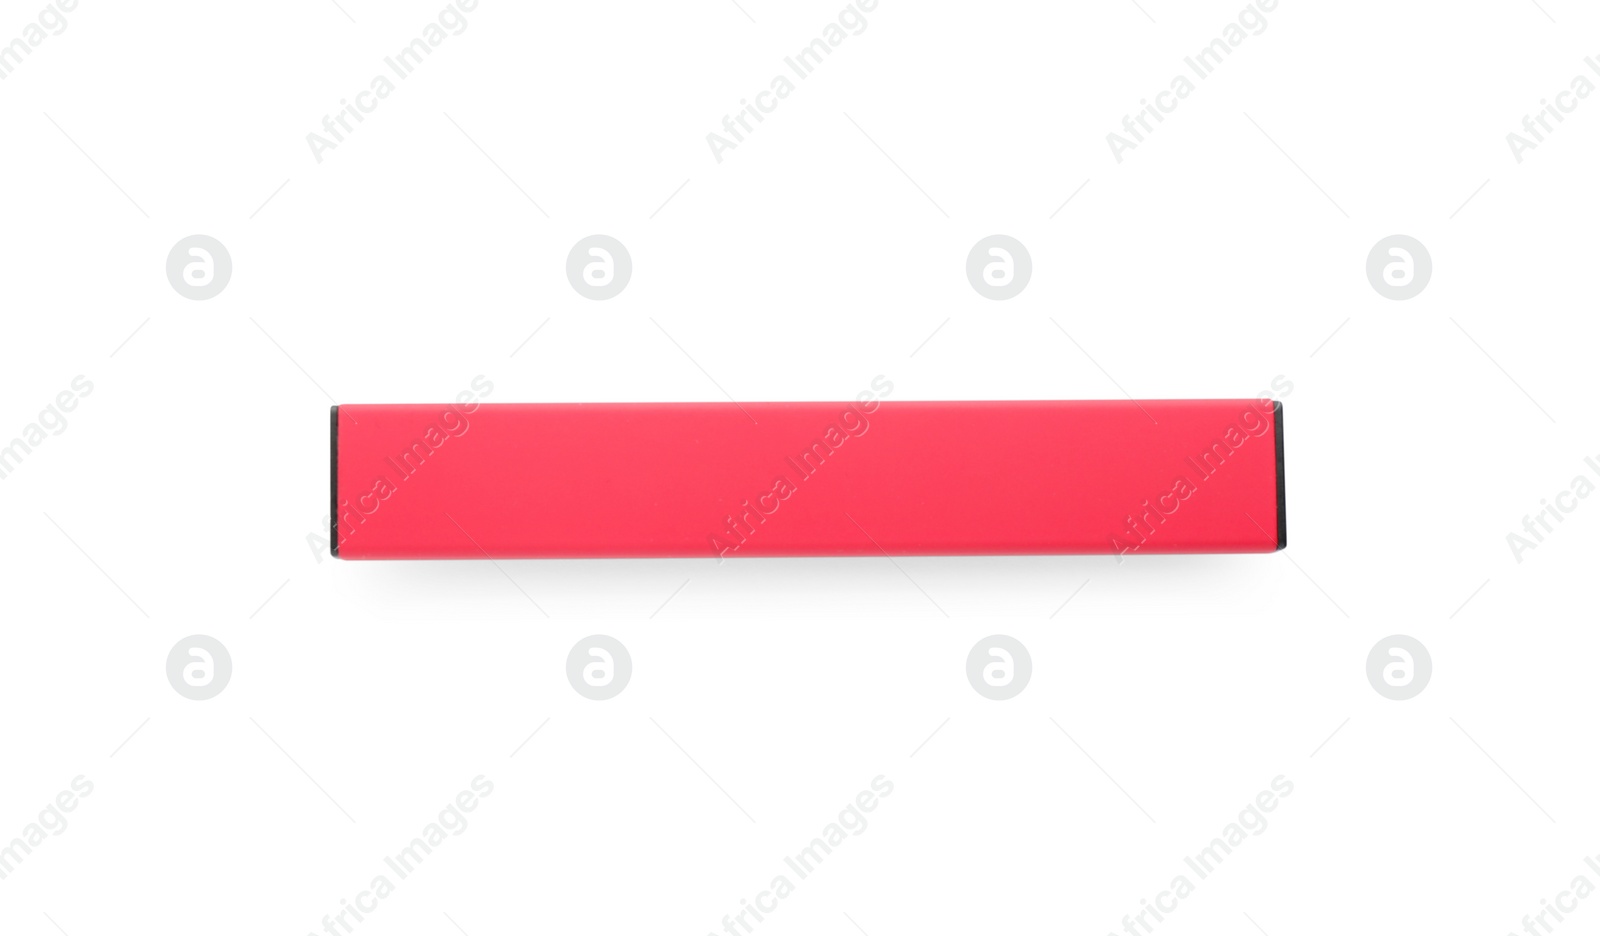 Photo of Disposable electronic smoking device isolated on white, top view